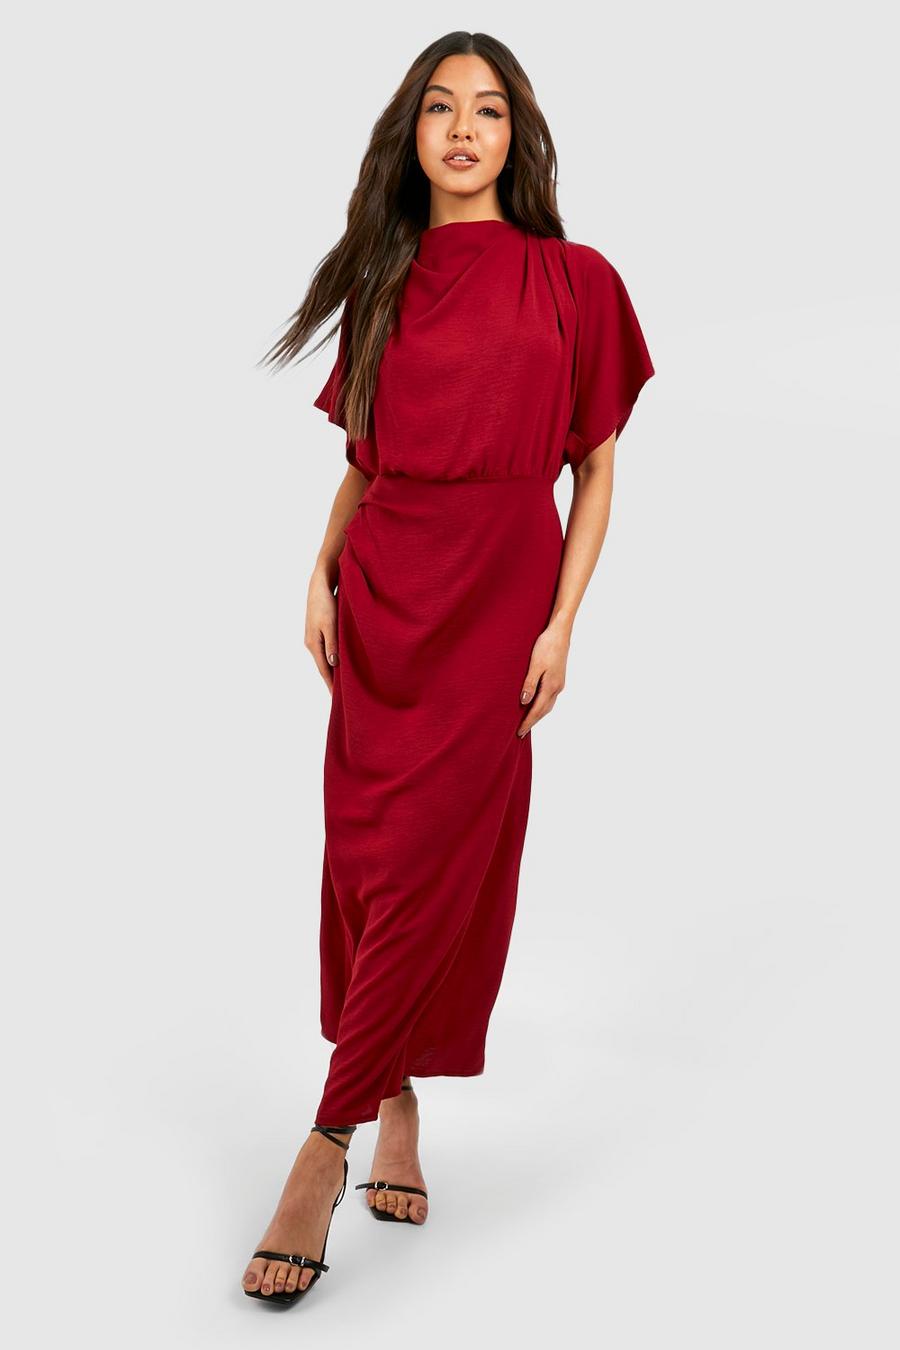 Merlot red Hammered Cowl Neck Ruched Side Midi Dress